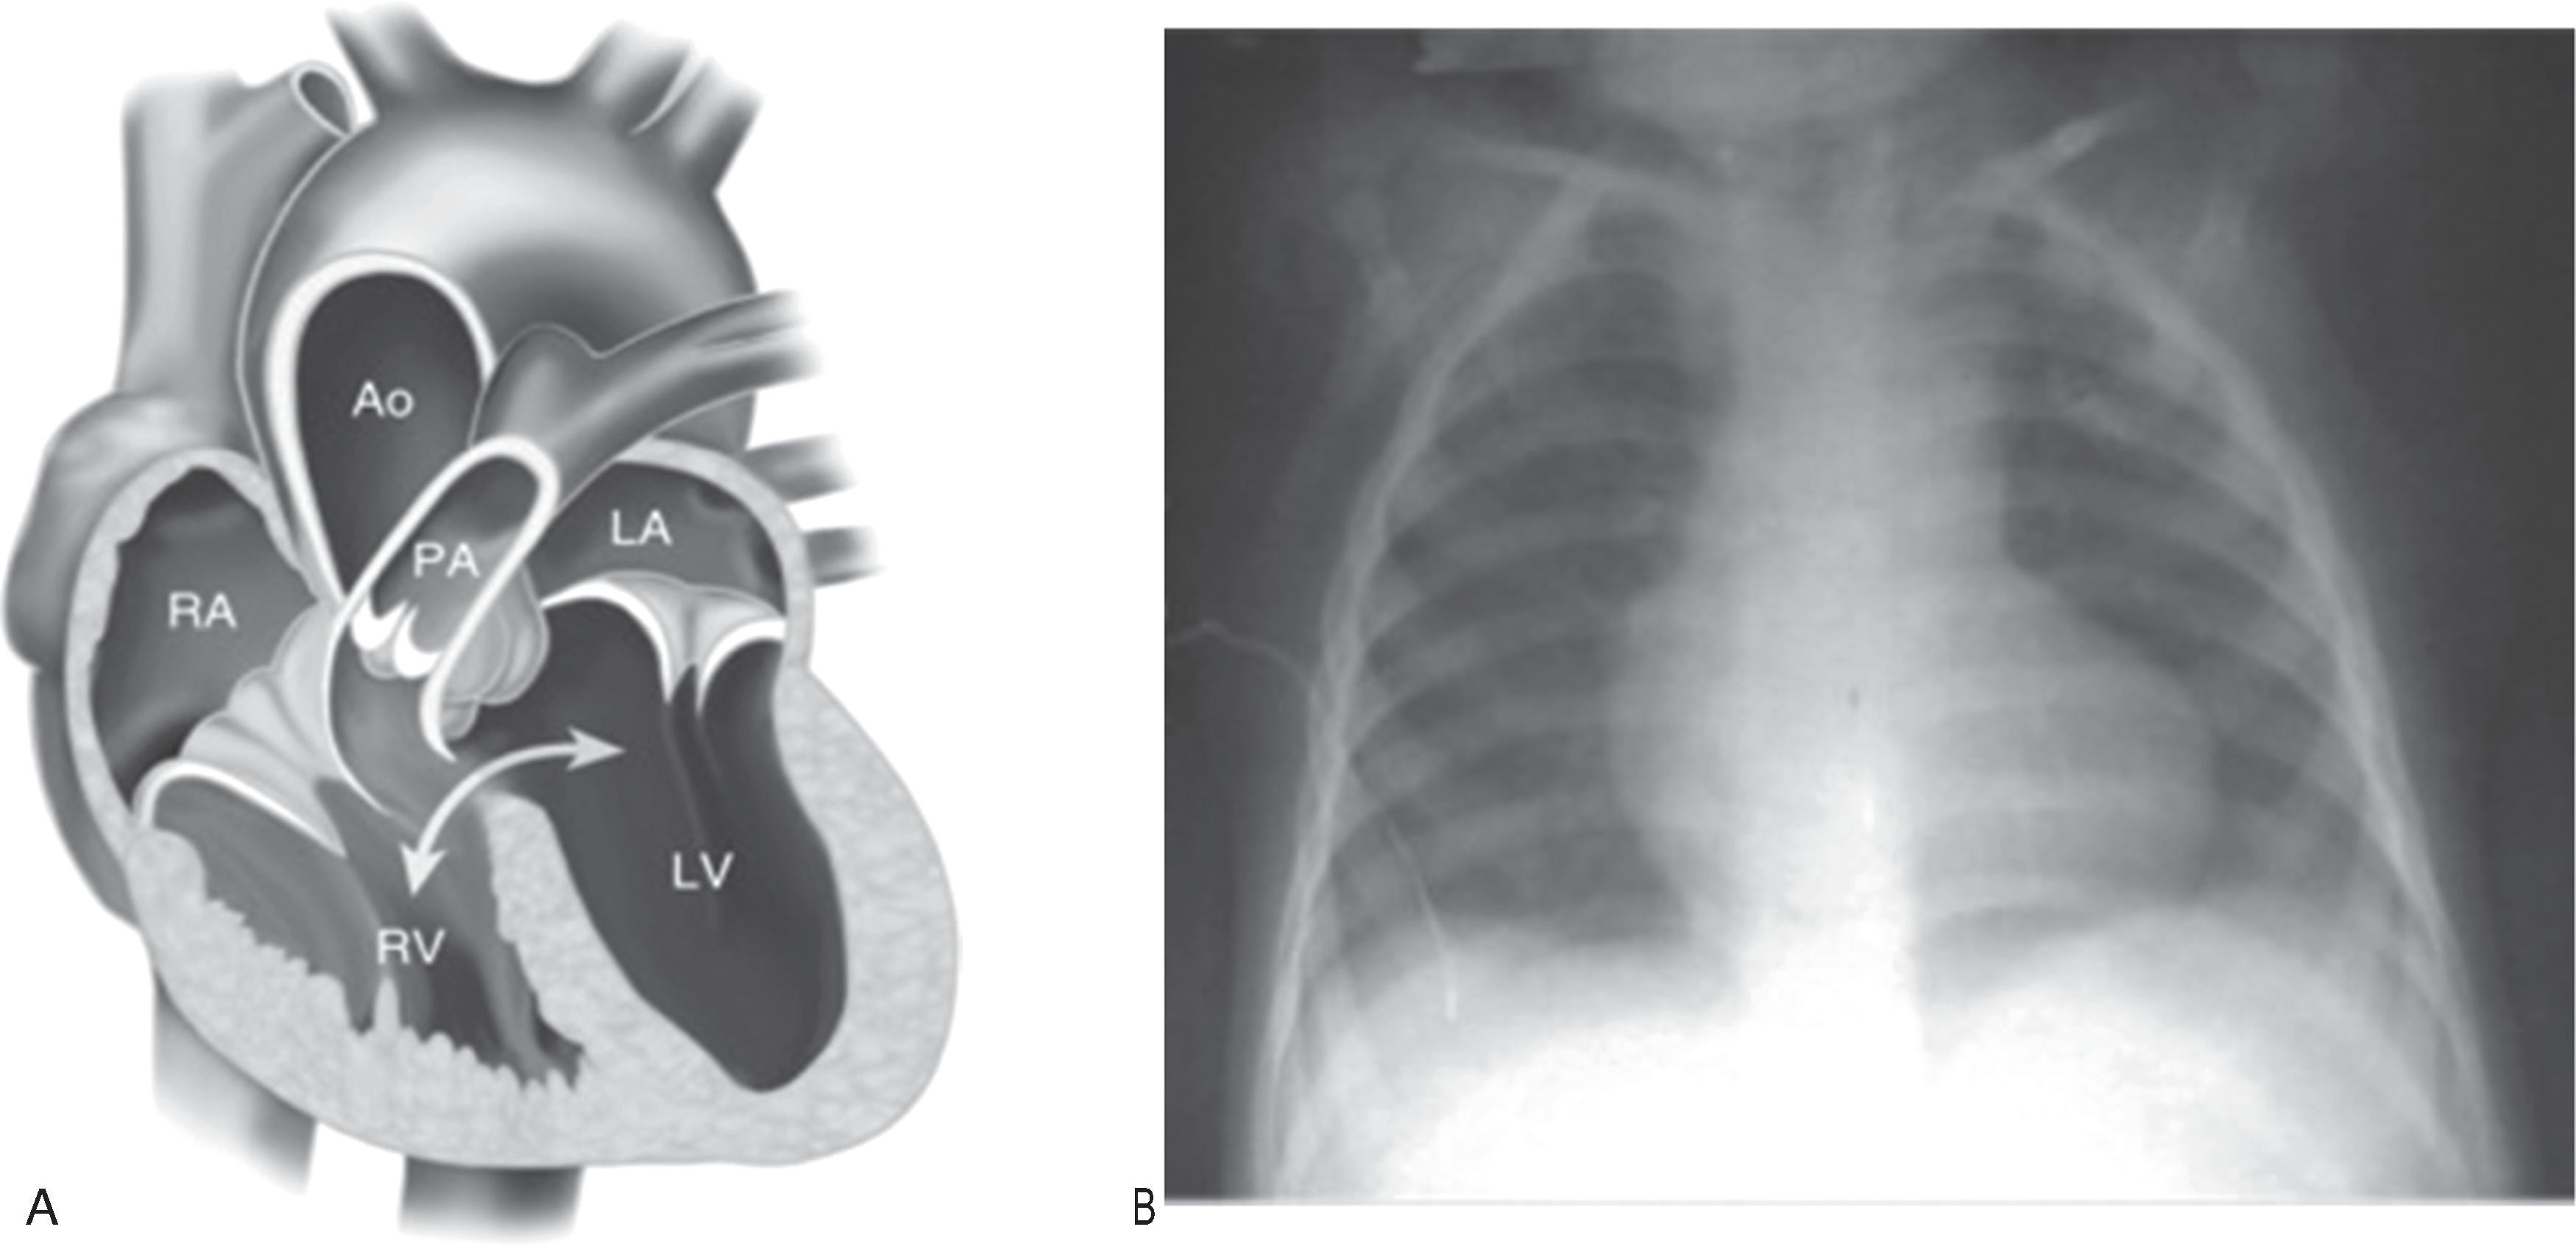 Fig. 36.1, Tetralogy of Fallot (TOF) . (A) Schematic shows a large VSD with an enlarged aorta (Ao) overriding the defect. There is a notable valvular pulmonic stenosis and compensatory right ventricular (RV) hypertrophy. (B) Chest radiograph of a 3-month-old infant with TOF shows a boot-shaped heart. LA, Left atrium; LV, left ventricle; PA, pulmonary artery; RA, right atrium; RV, right ventricle; VSD, ventricular septal defect.